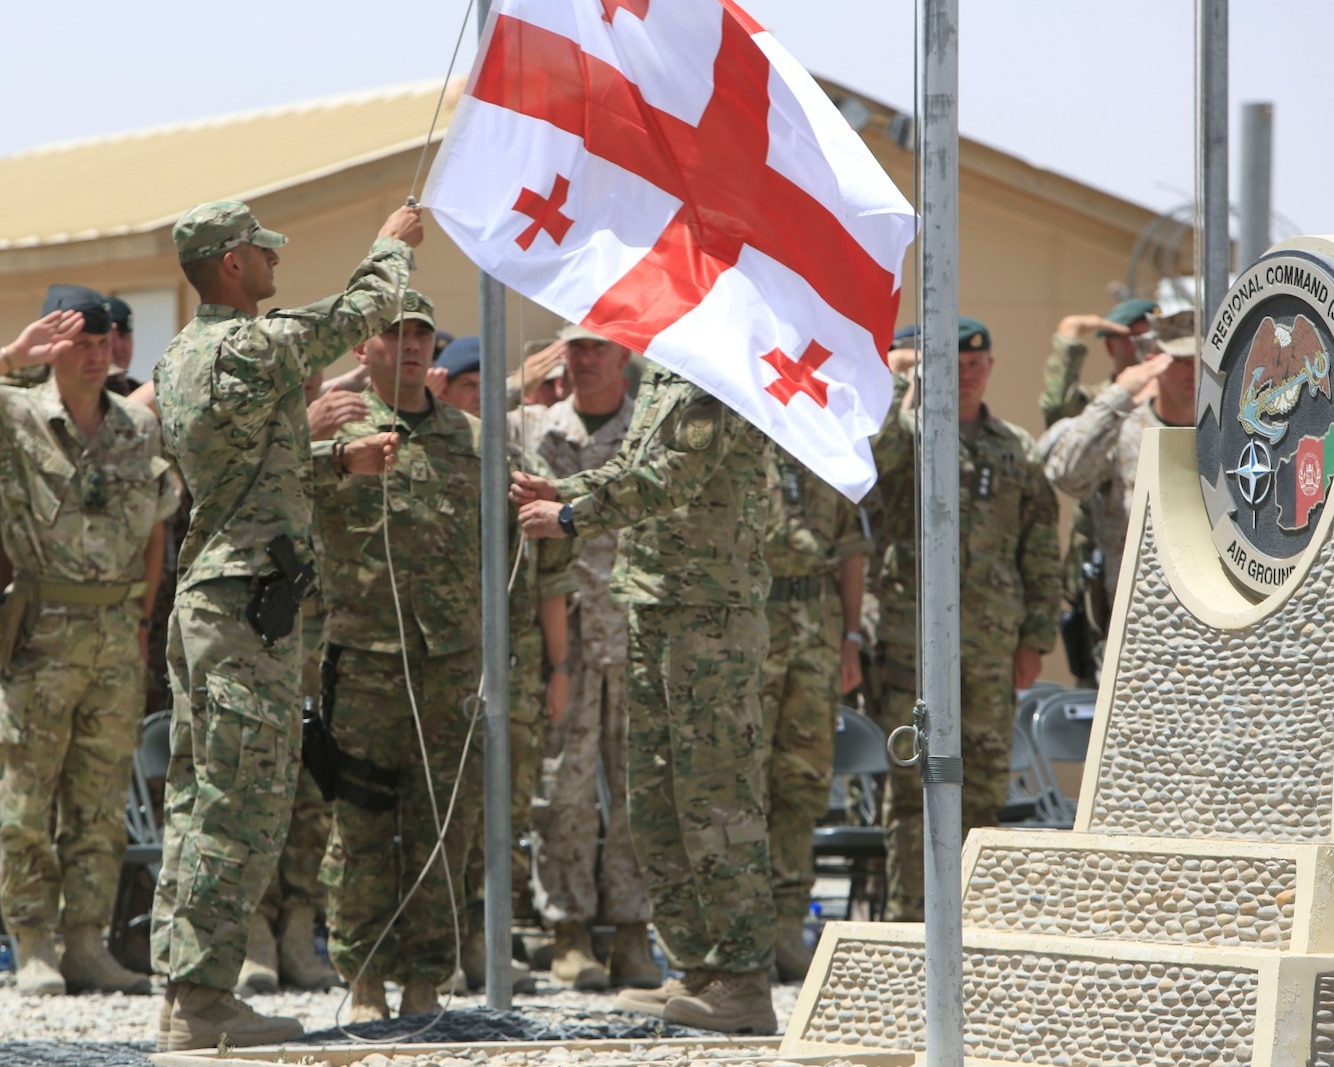 Georgian soldiers, with the Georgian contingent to Afghanistan, participate in the Georgian Flag Lowering ceremony aboard Camp Leatherneck, Helmand province, Afghanistan, July 15, 2014. The lowering of the Georgian Flag over Camp Leatherneck formally concludes the country's participation in Regional Command (Southwest), since 2004. (Official U.S. Marine Corps photo by Sgt. Dustin D. March/Released)